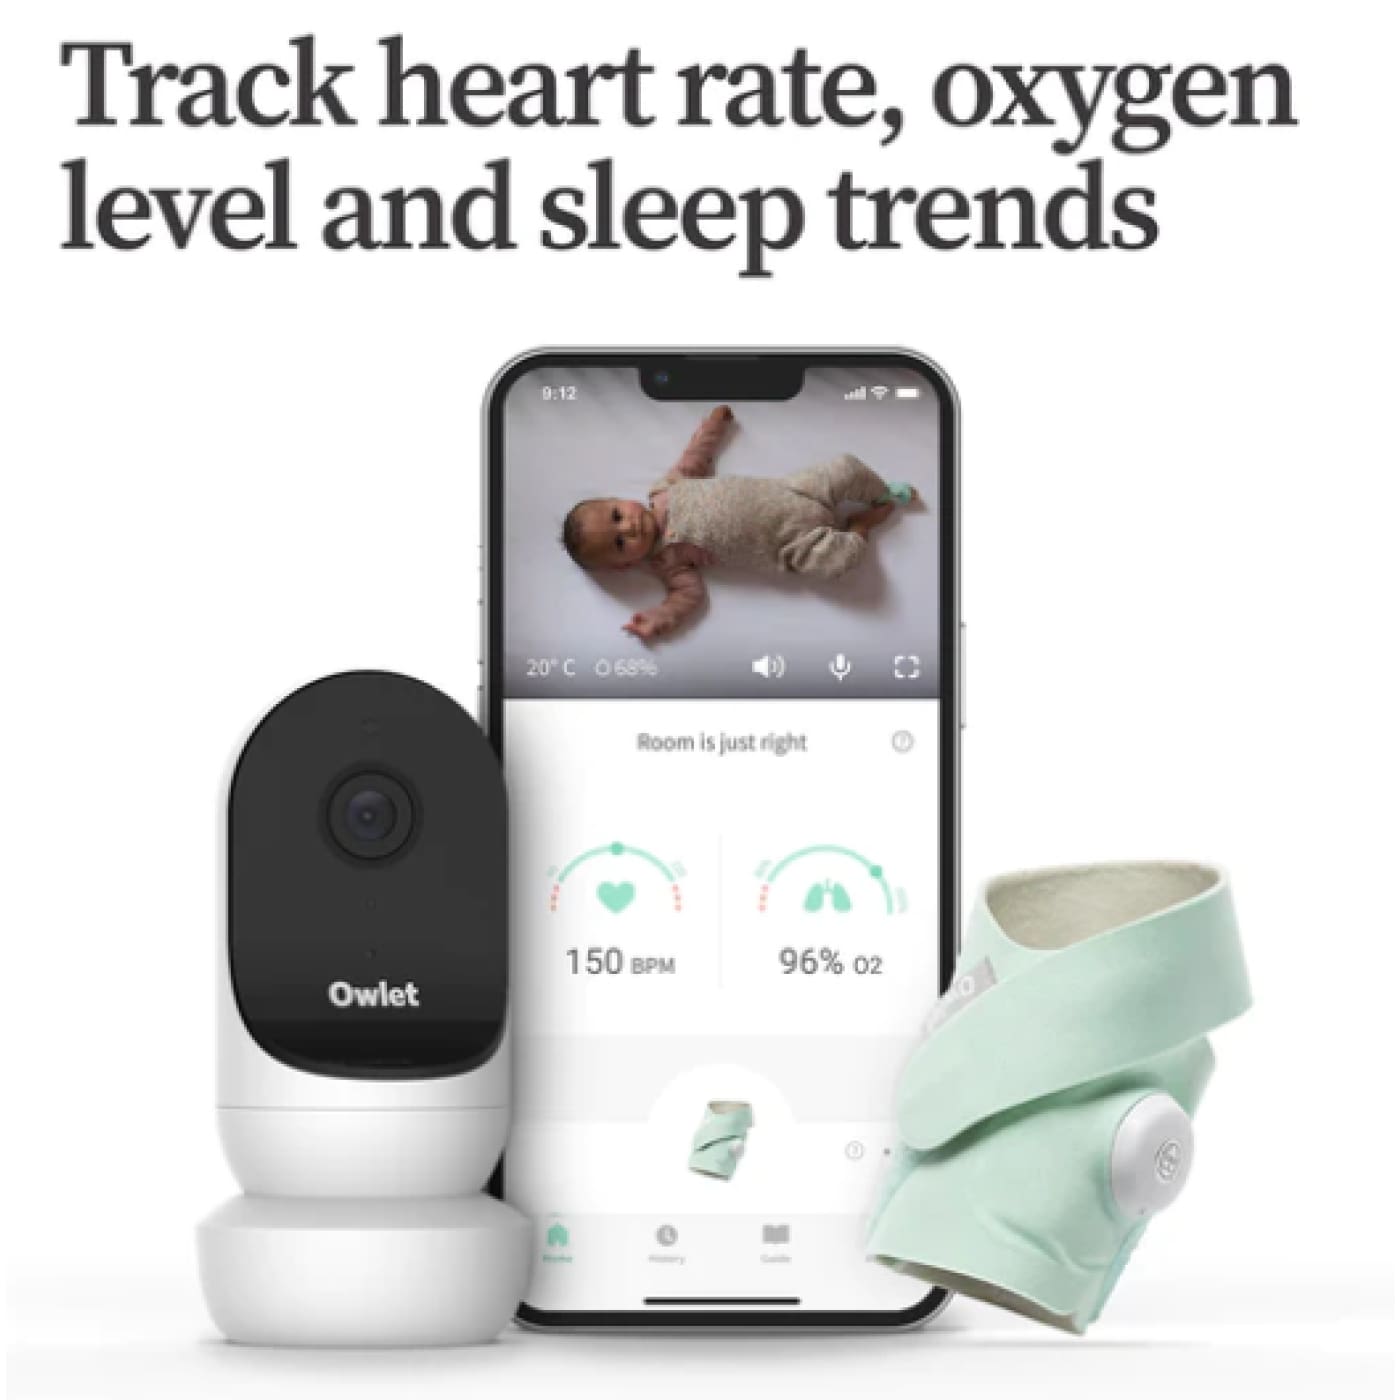 Owlet Monitor Duo 2 - Smart Sock 3 + Cam 2 Baby Monitor - Mint - Mint - HEALTH & HOME SAFETY - BABY MONITORS